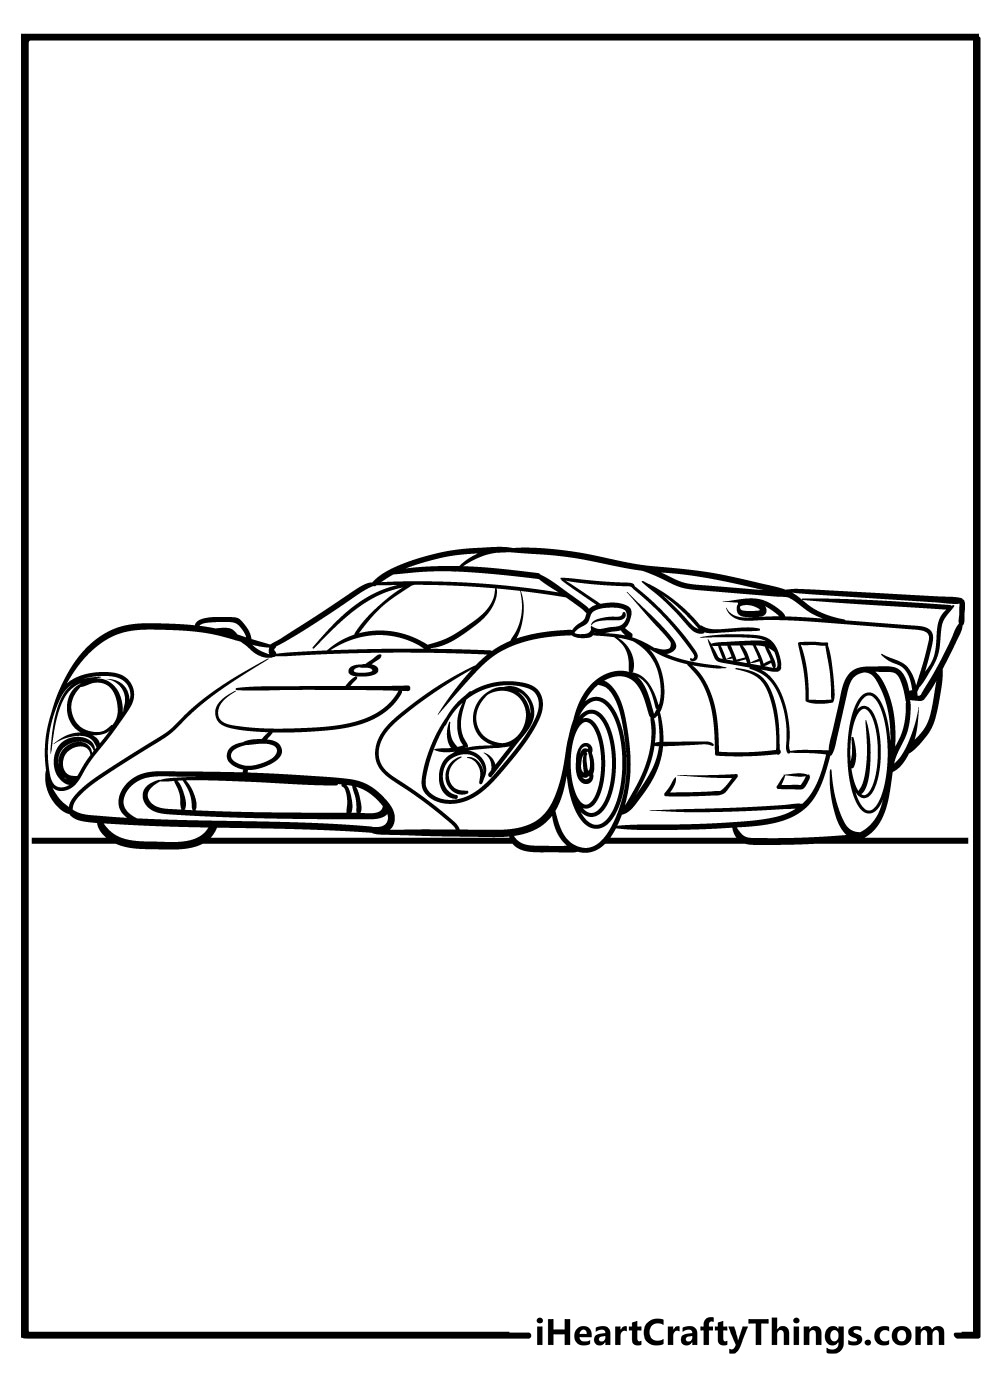 compex Super Cars Coloring Pages free download